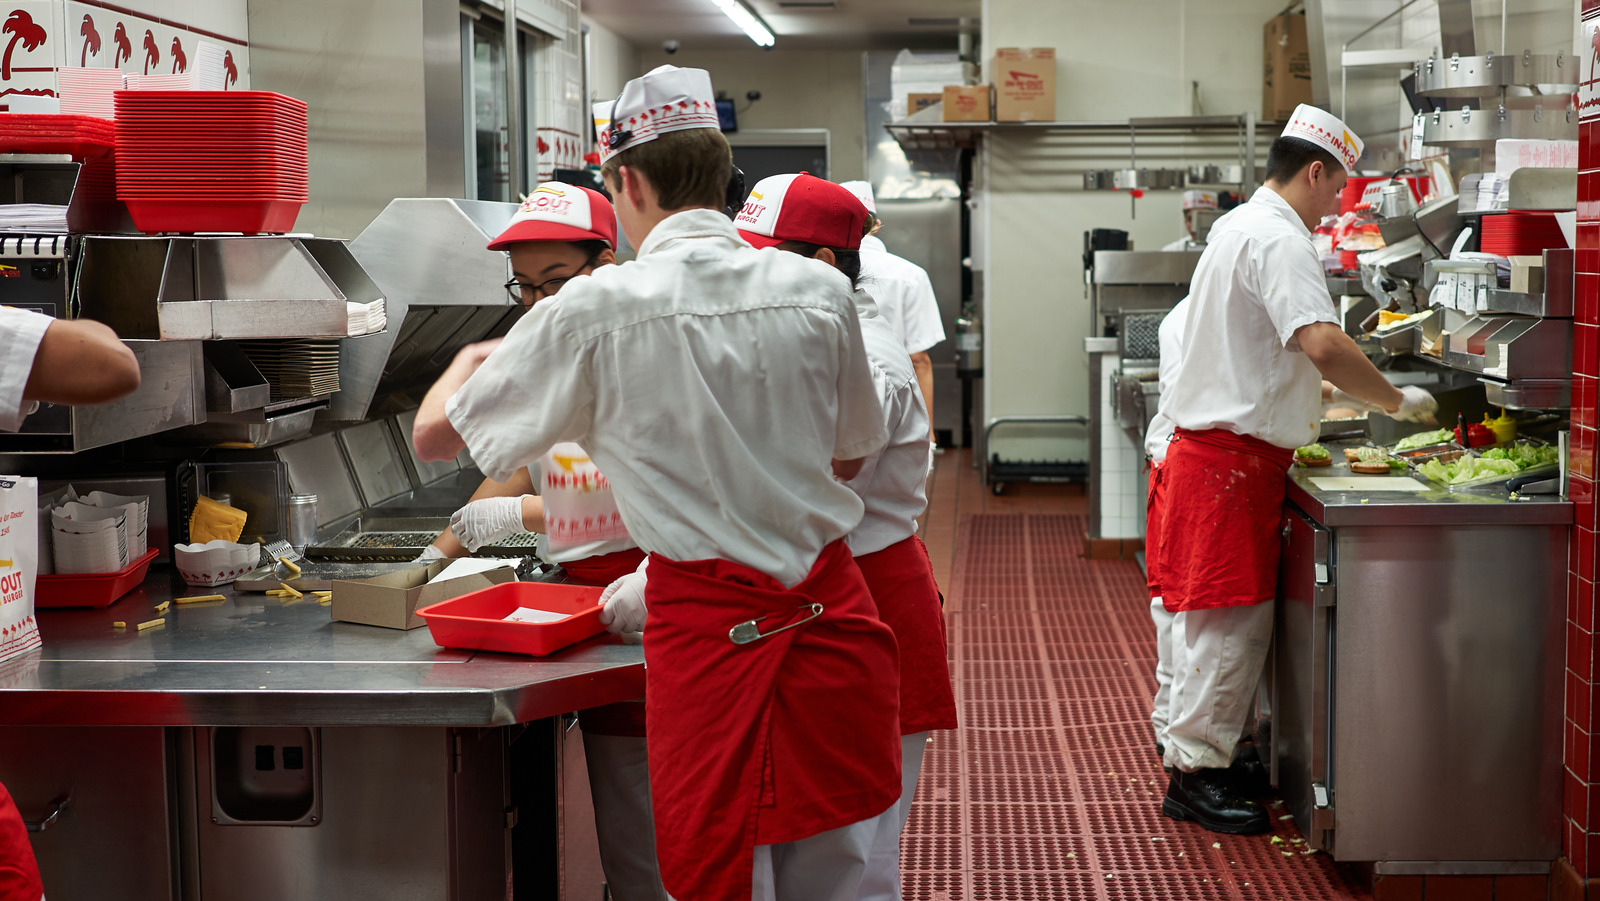 What California's Fast Food Bill Could Mean For Workers